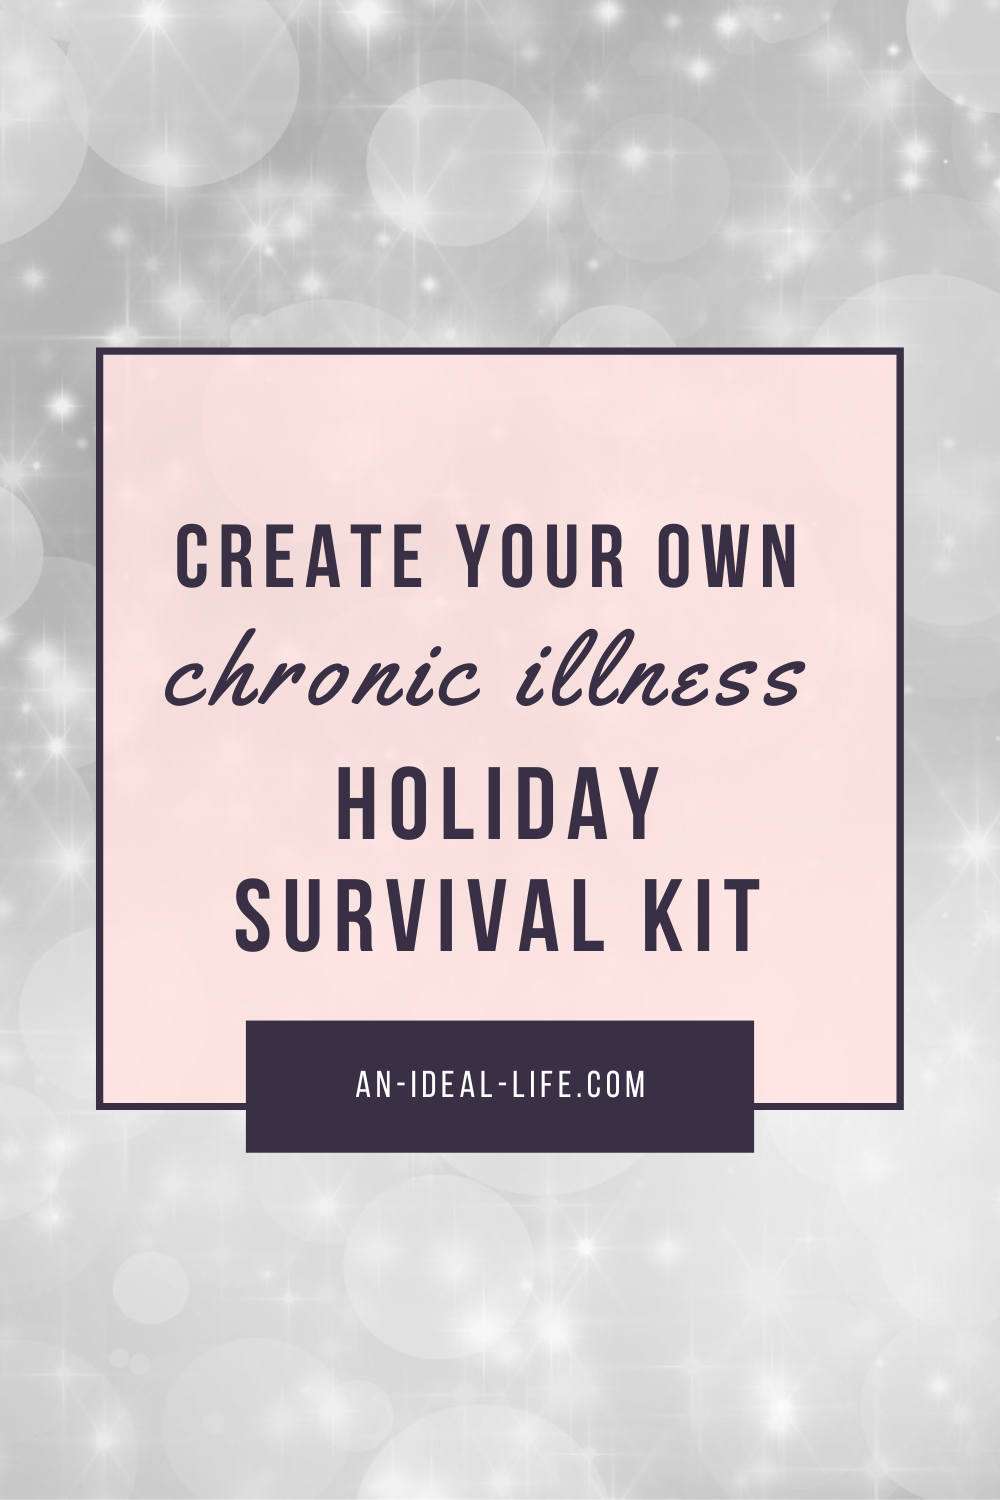 Create Your Own Chronic Illness Holiday Survival Kit